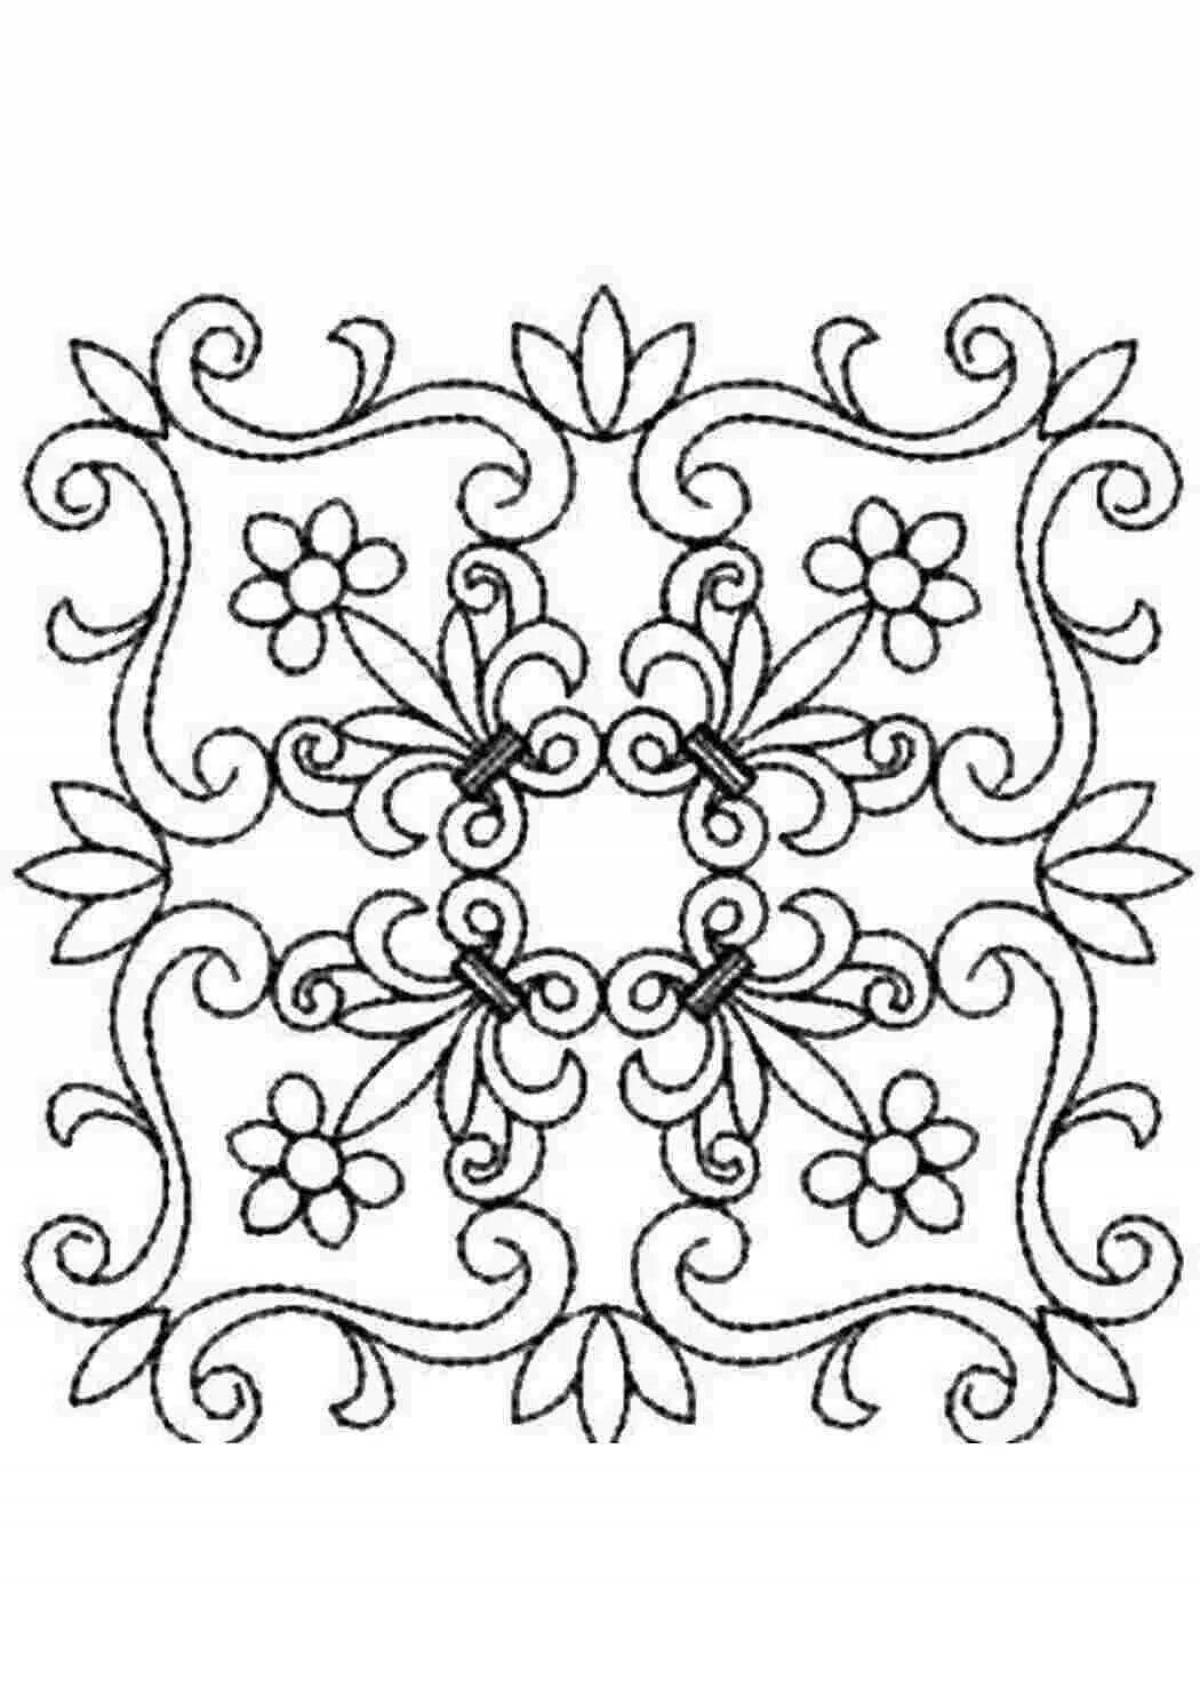 Colorful scarf pattern coloring pages for kids